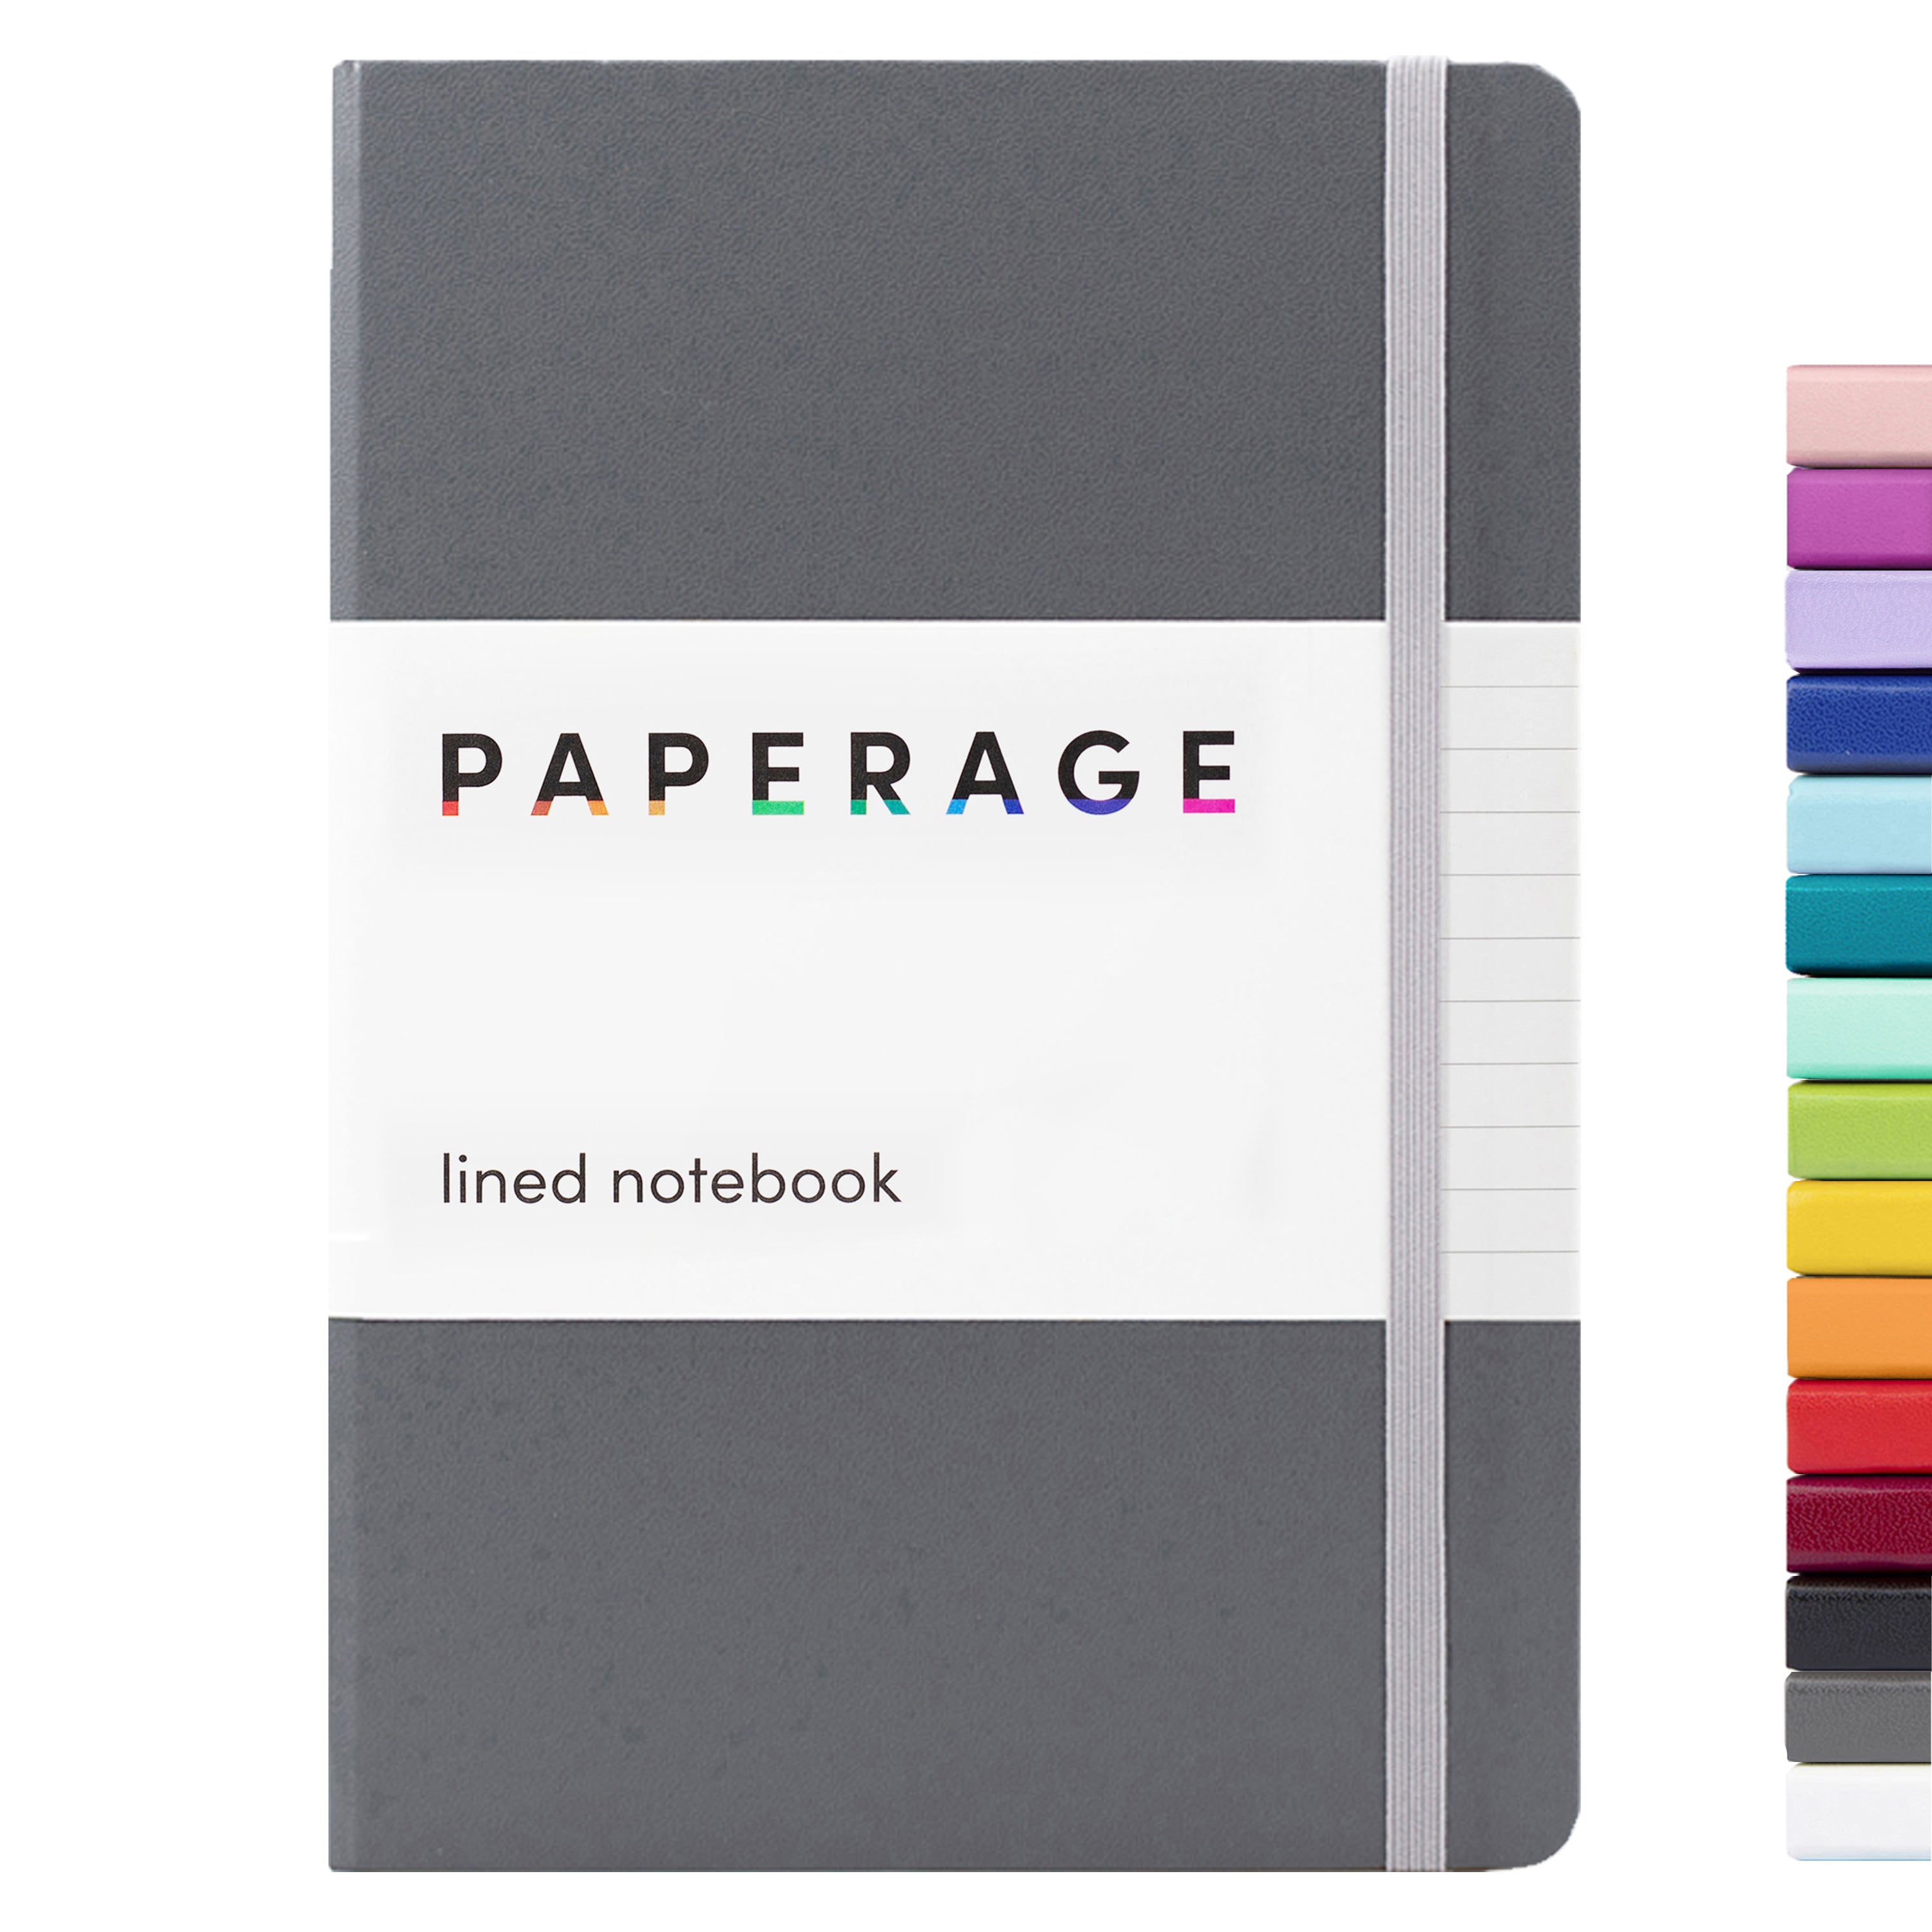 PAPERAGE 10 Pack Lined Journal Notebook, Hard Cover, Medium 5.7 inch x 8 inch, 100 GSM Thick Paper (Black, Ruled), Size: 5.7 x 8